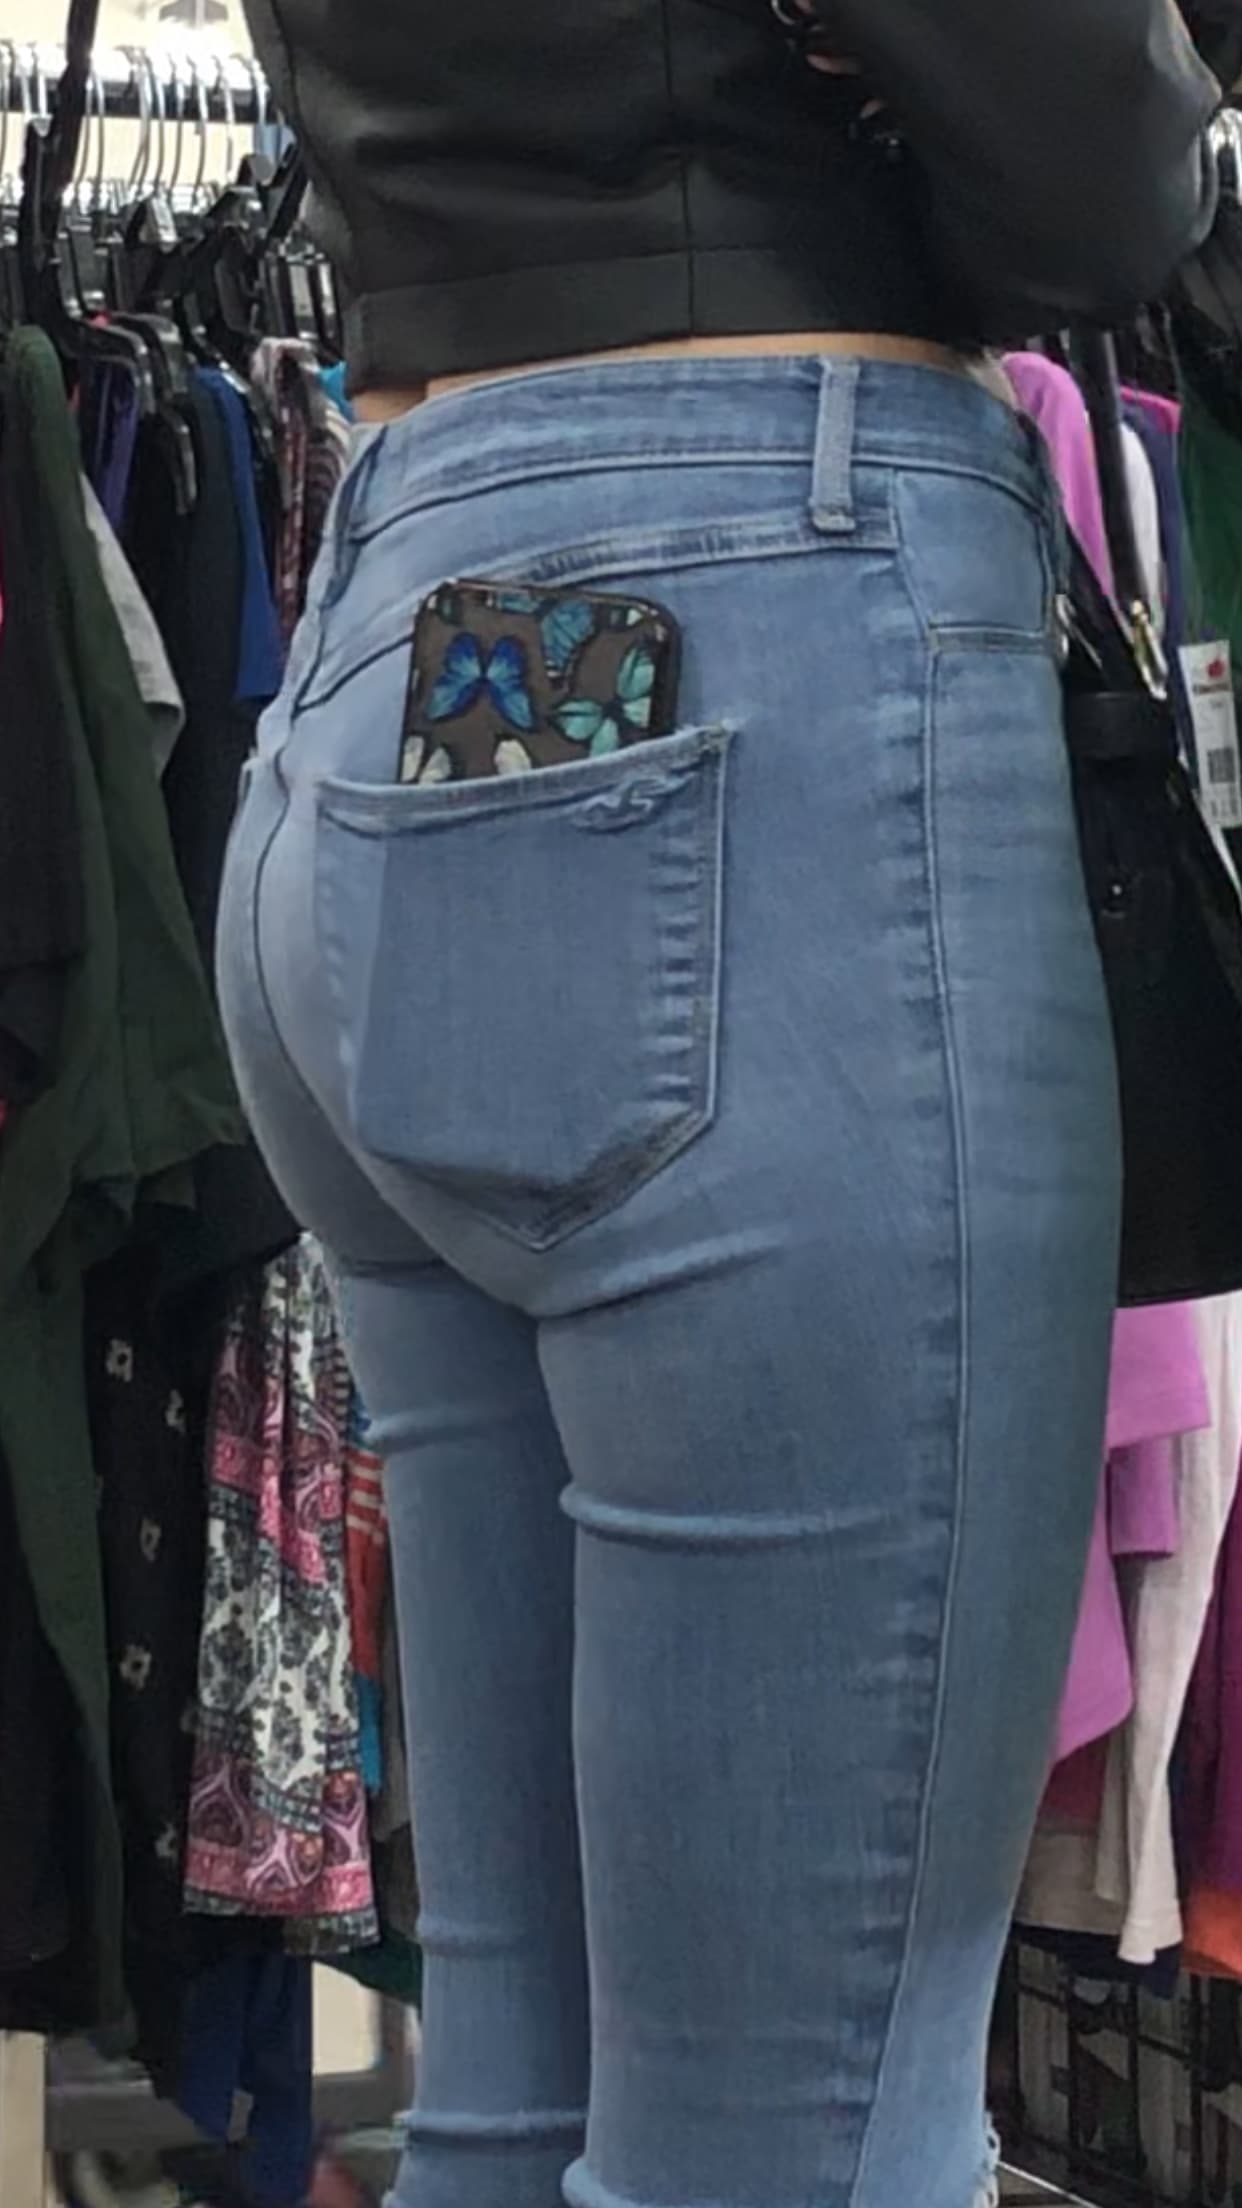 Blonde in tight jeans and boots at the thrift - Tight Jeans - Forum